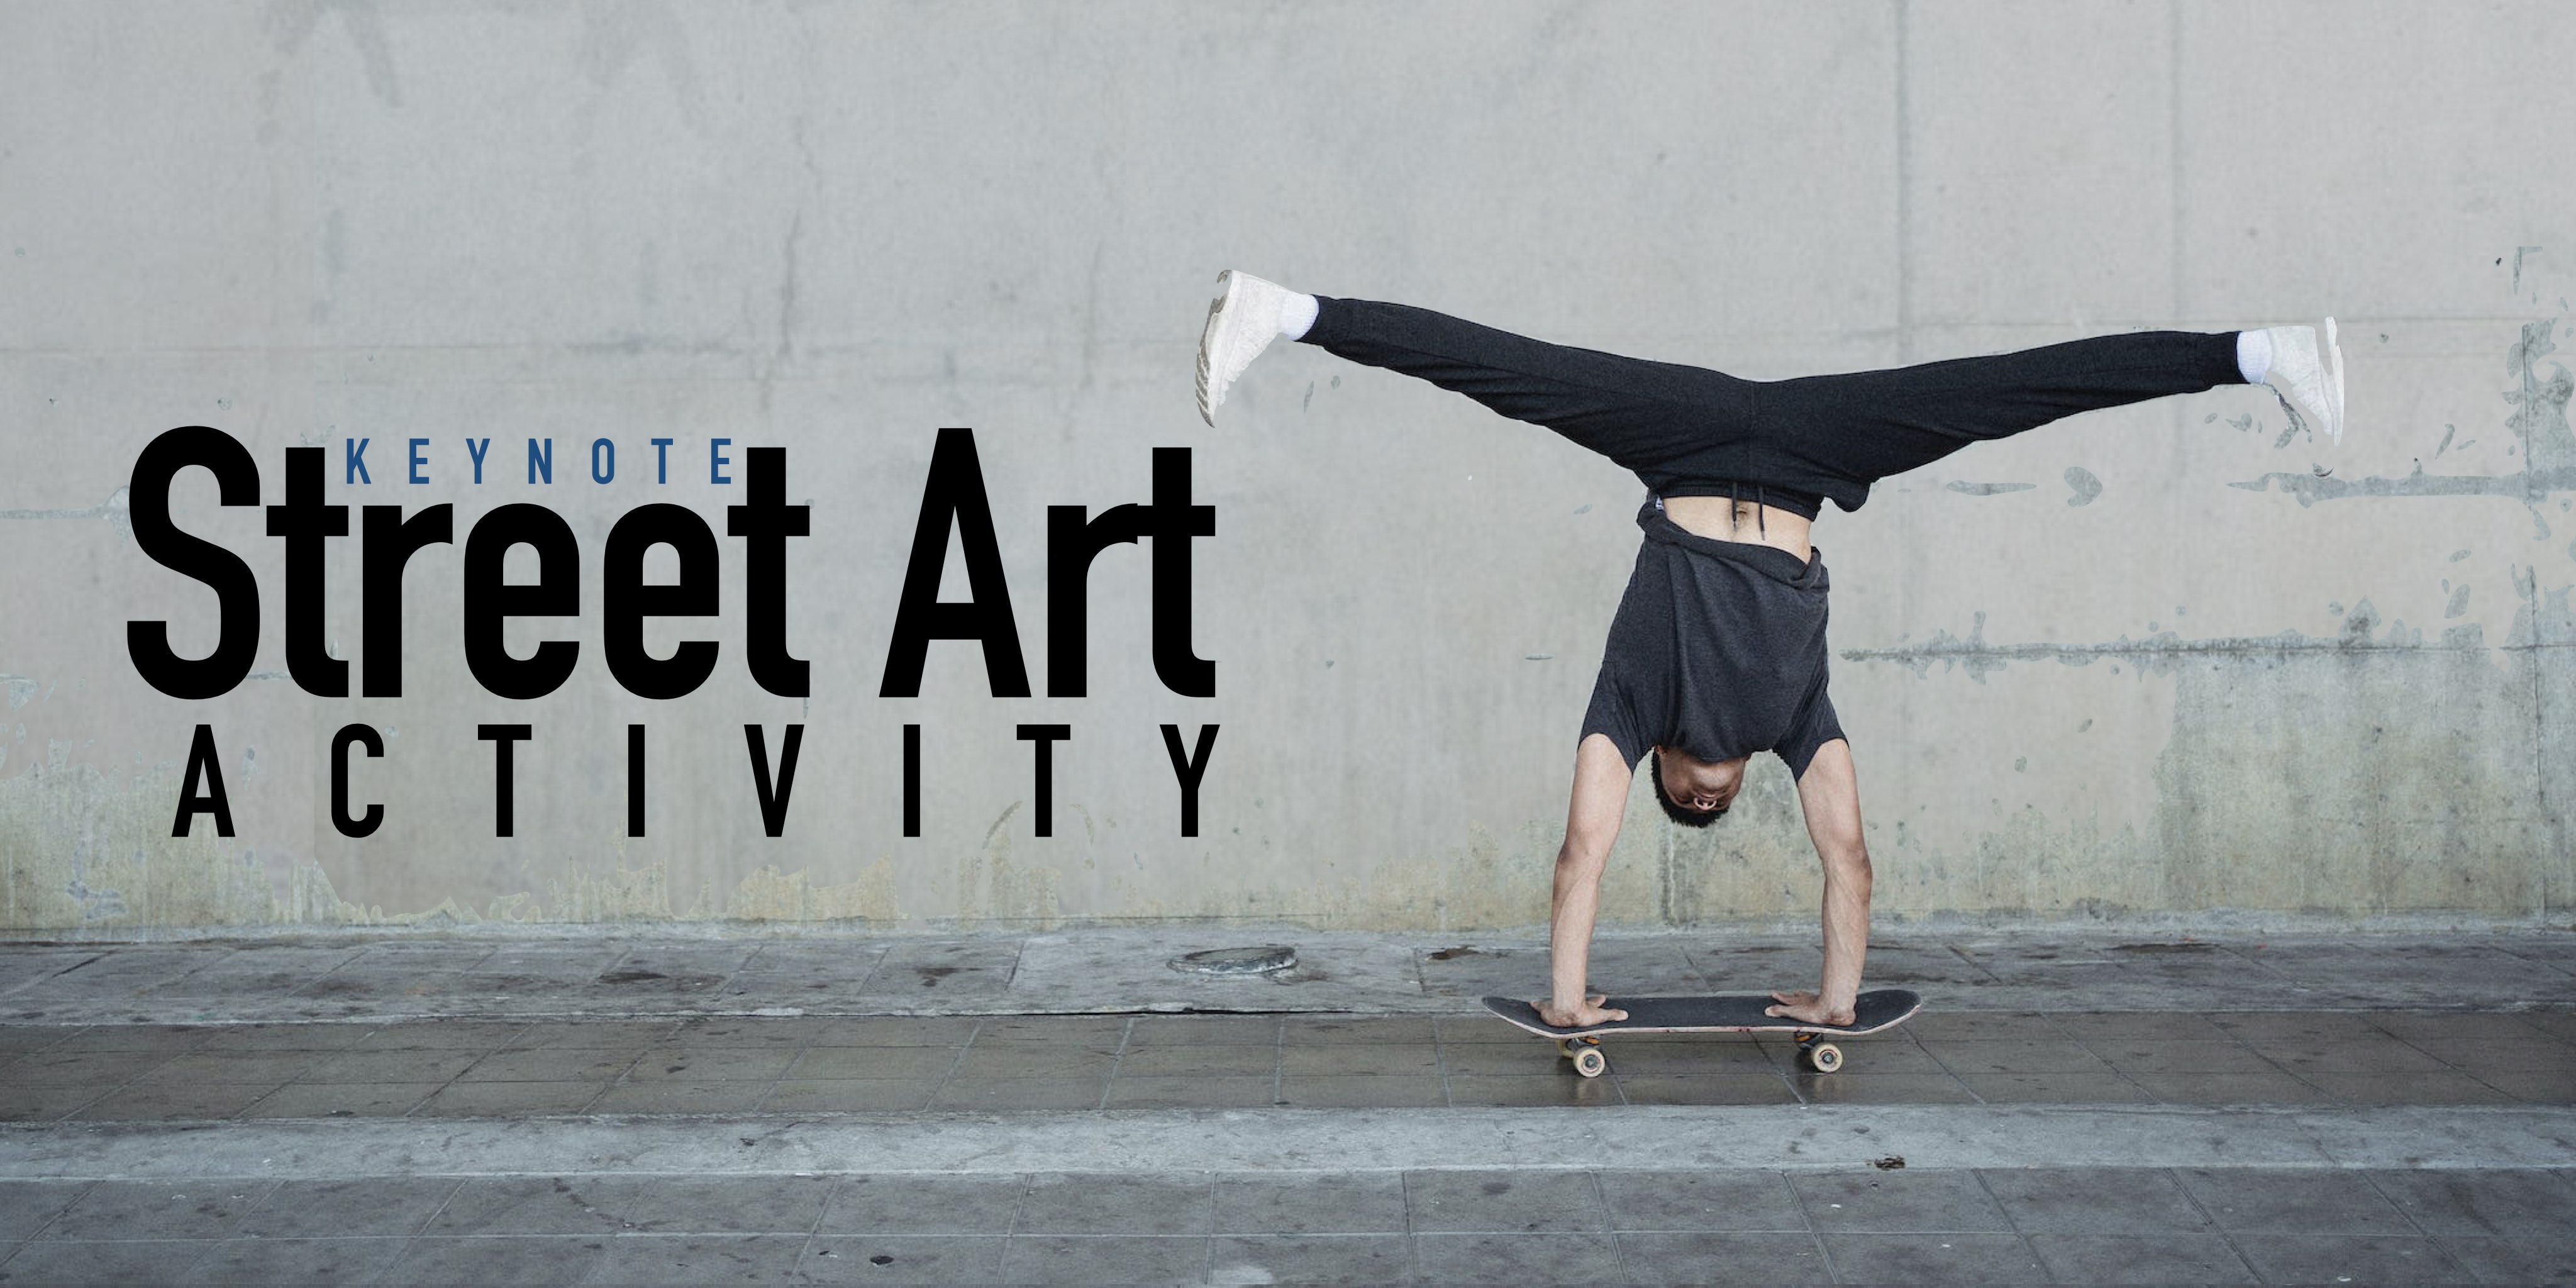 Image shows a person doing a handstand on top of a skateboard accompanied by the words "Keynote Street Art Activity"